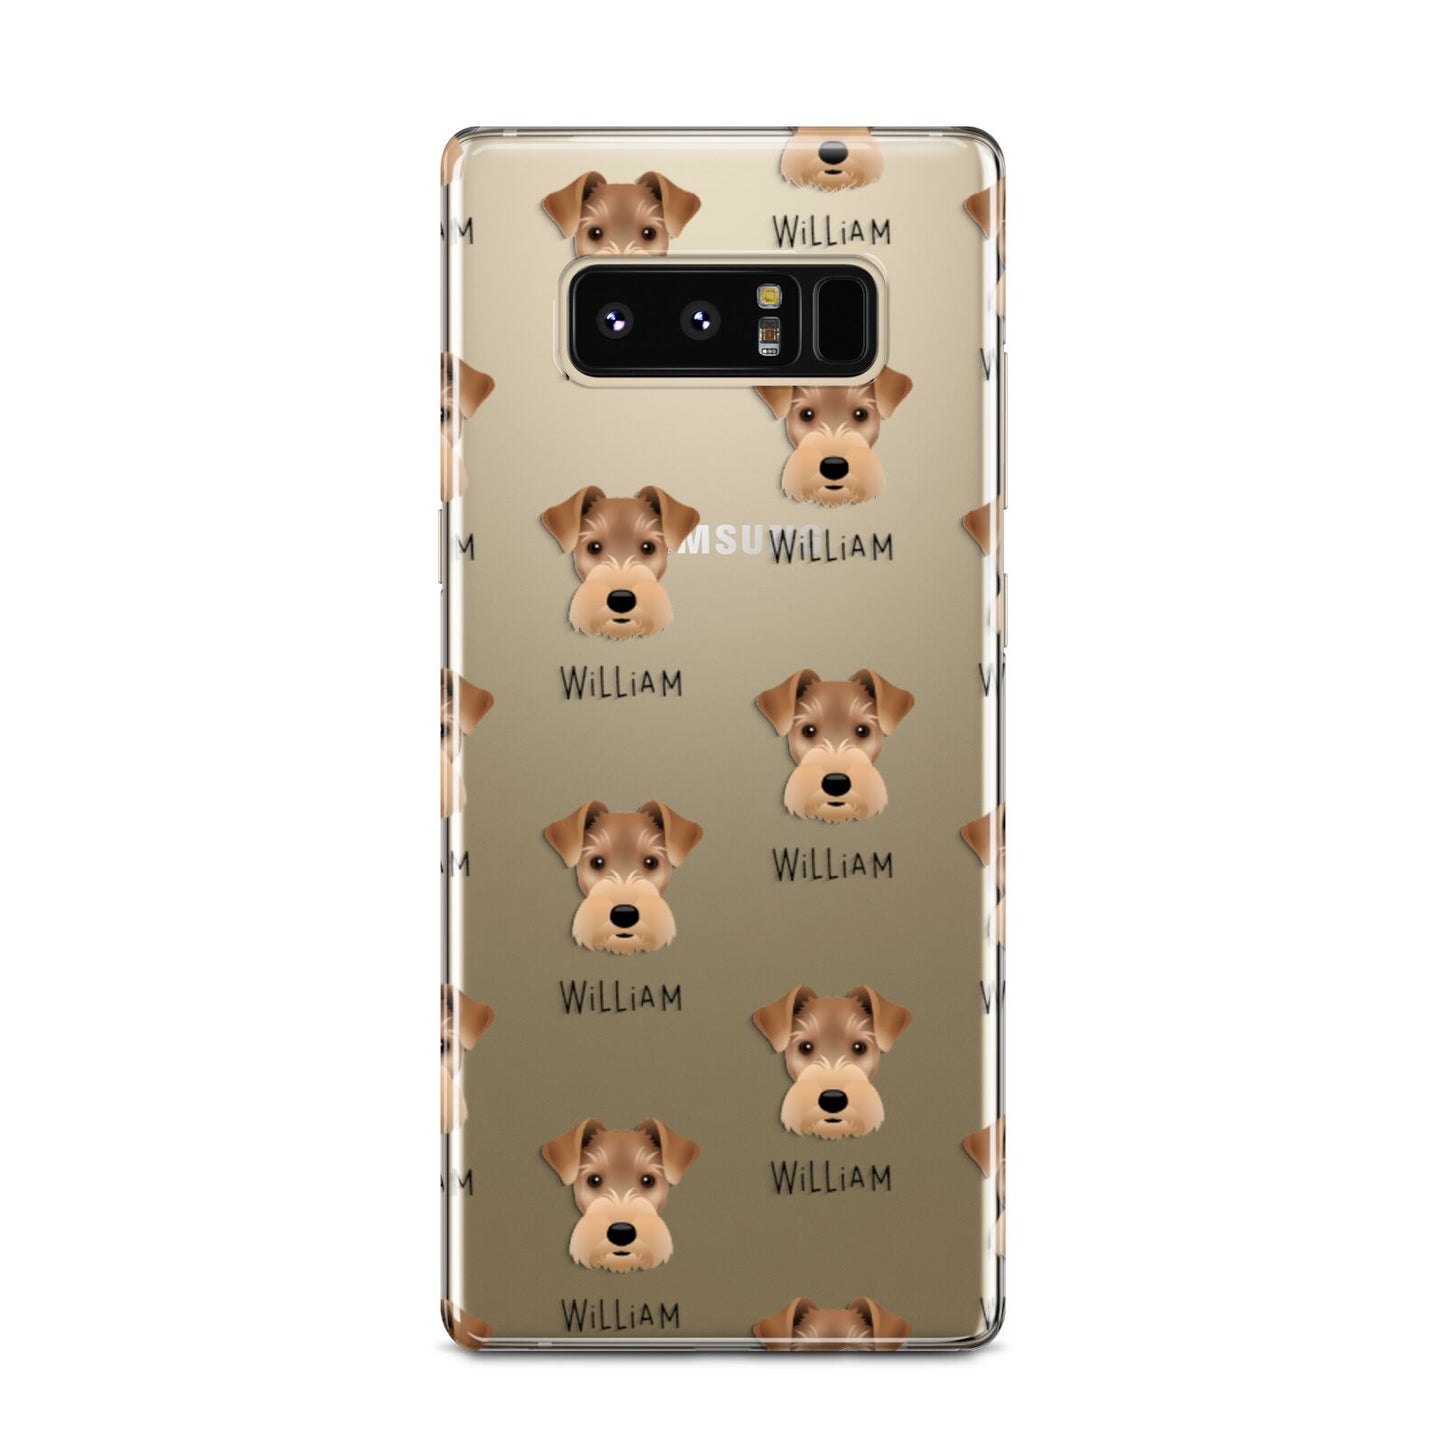 Welsh Terrier Icon with Name Samsung Galaxy Note 8 Case